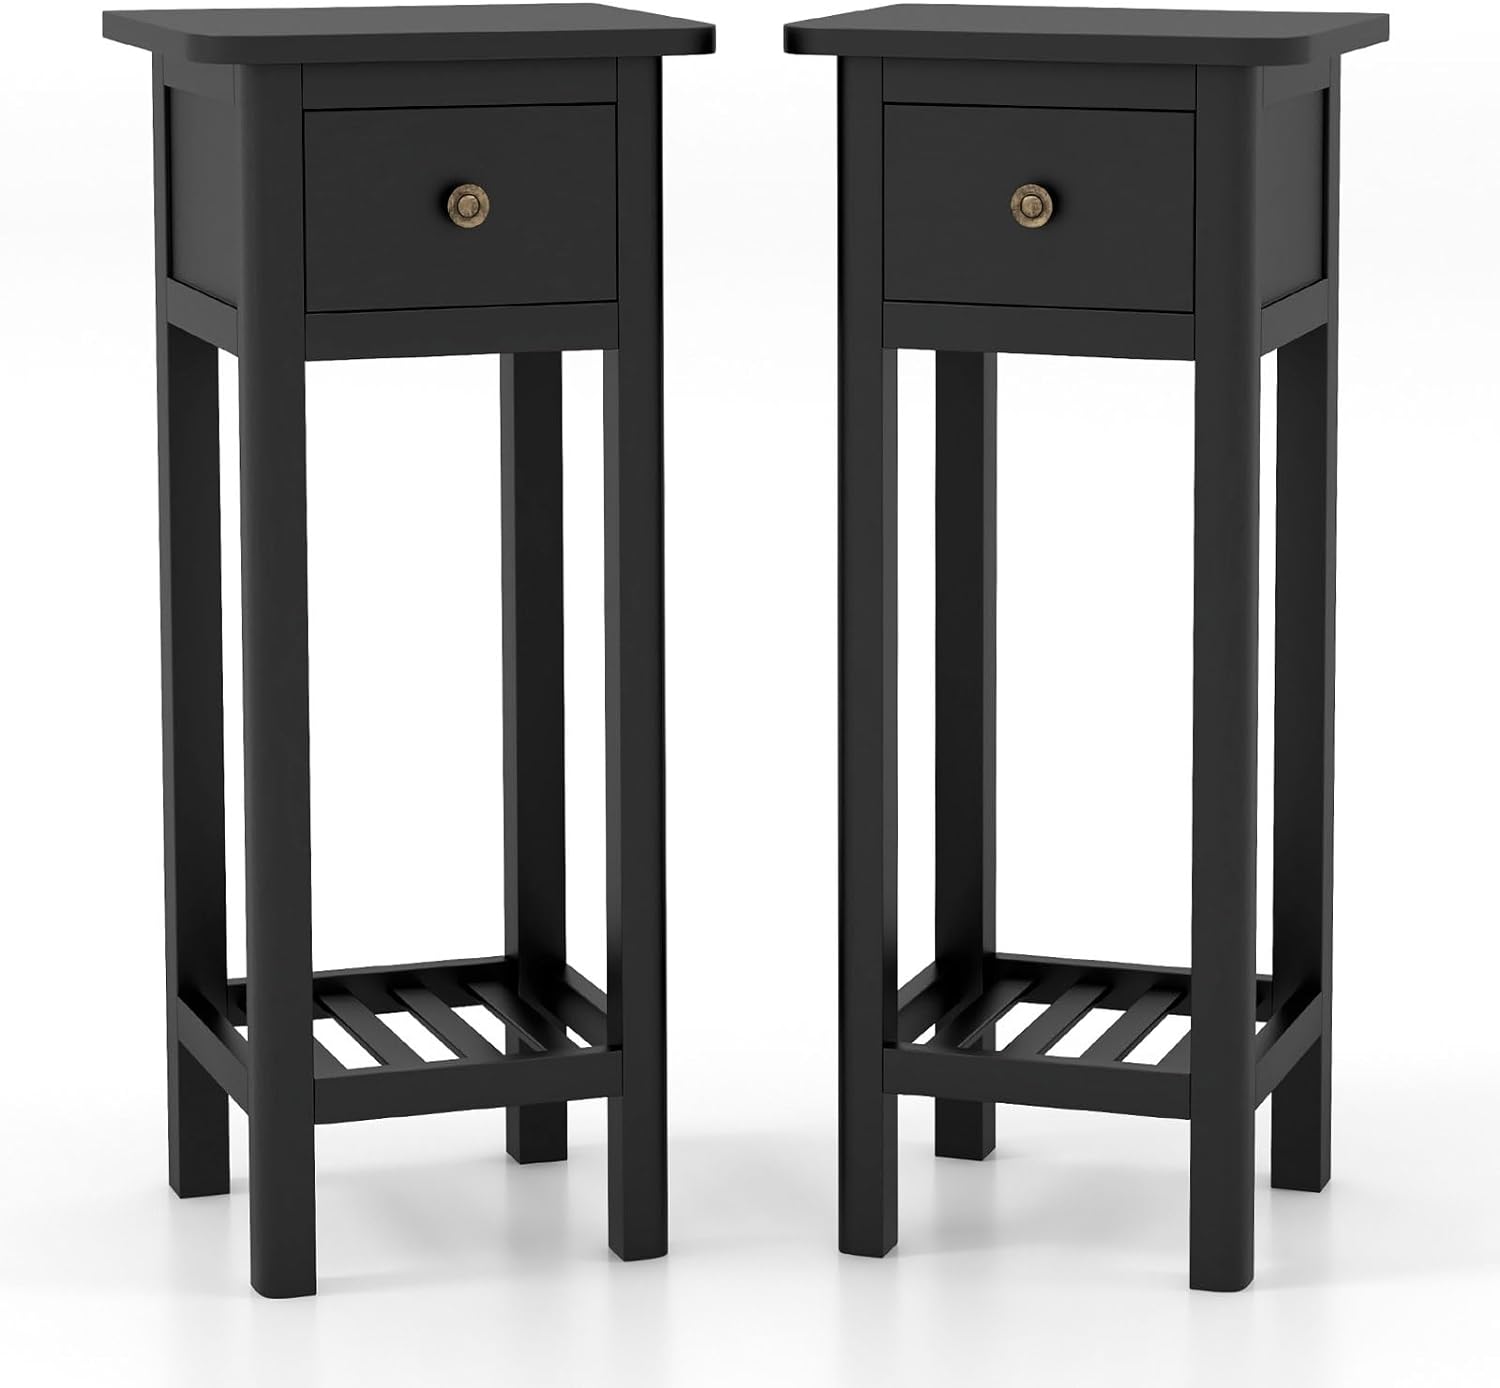 Giantex Narrow End Table with Drawer, Tall Acacia Wood Side Table with Bottom Shelf, Modern Bedside Tables